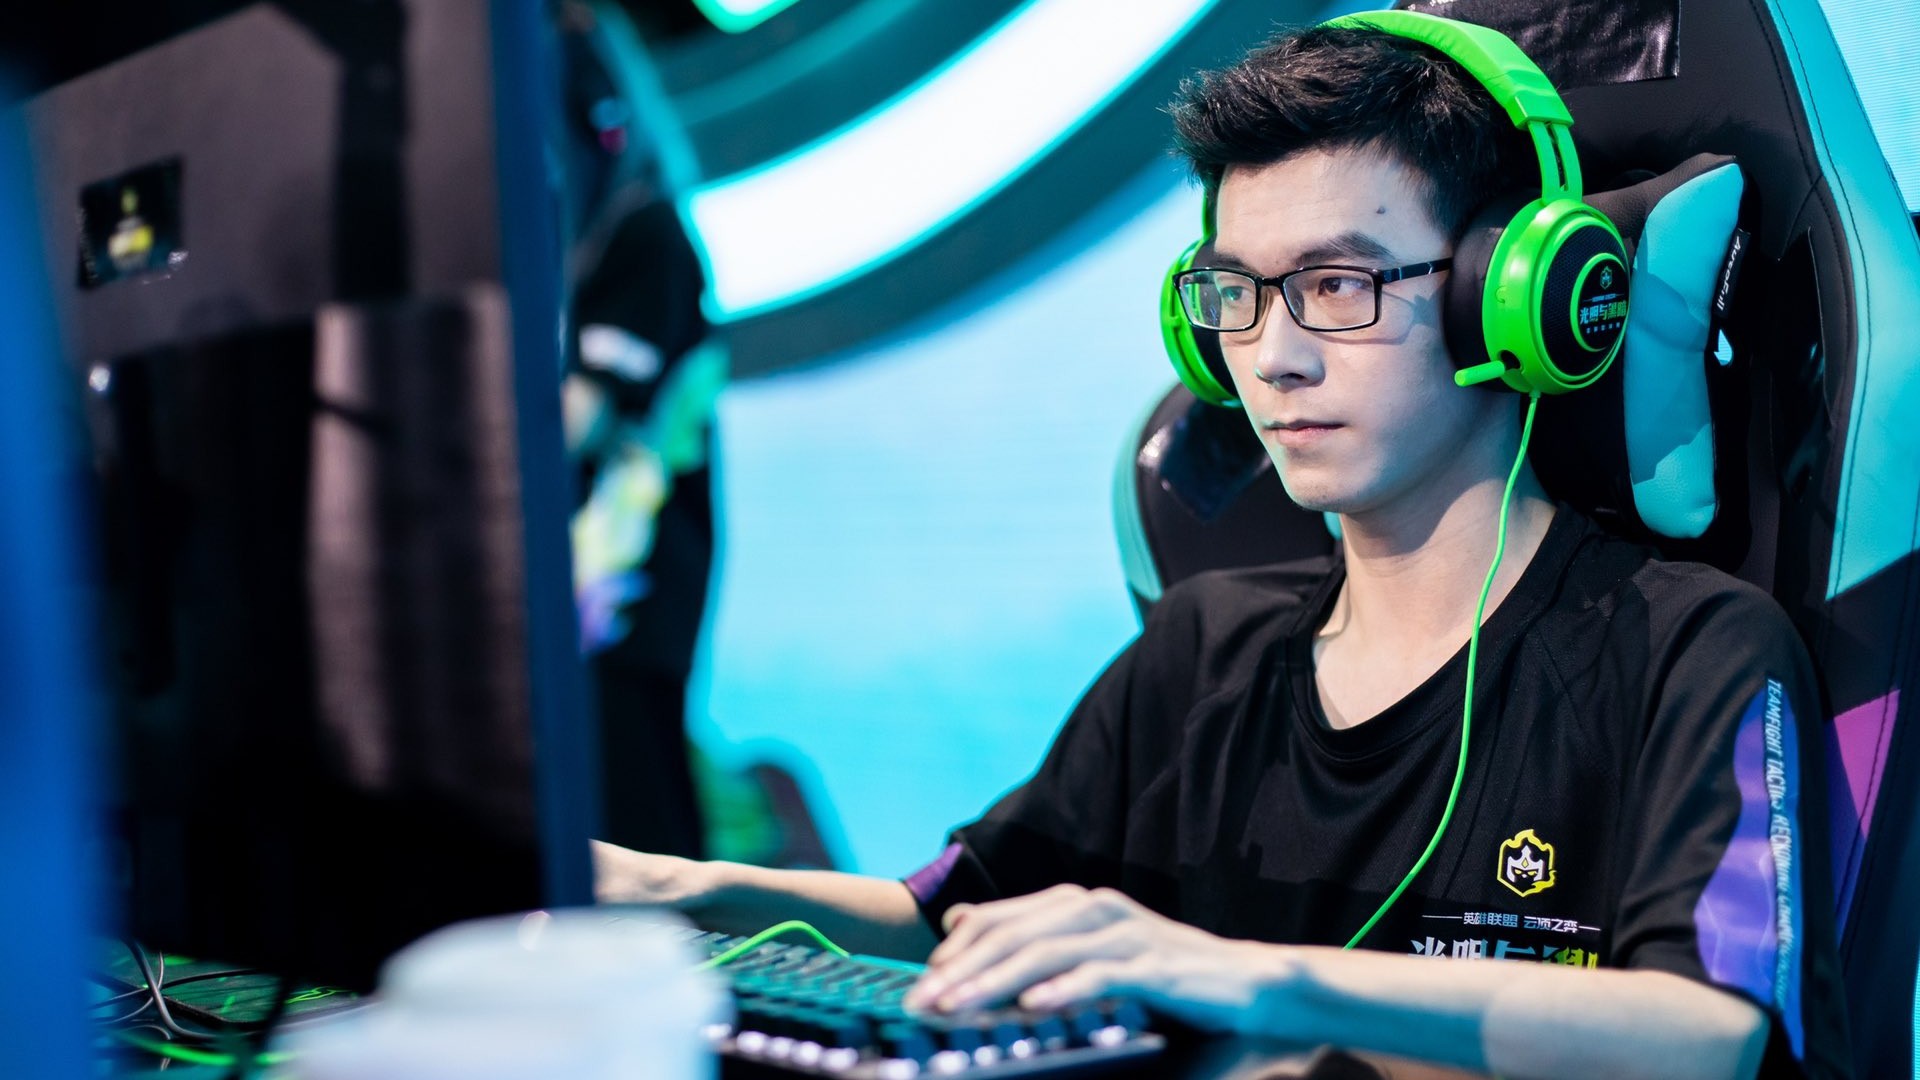 TFT Tournament Players Gadgets and Gadgets to Watch